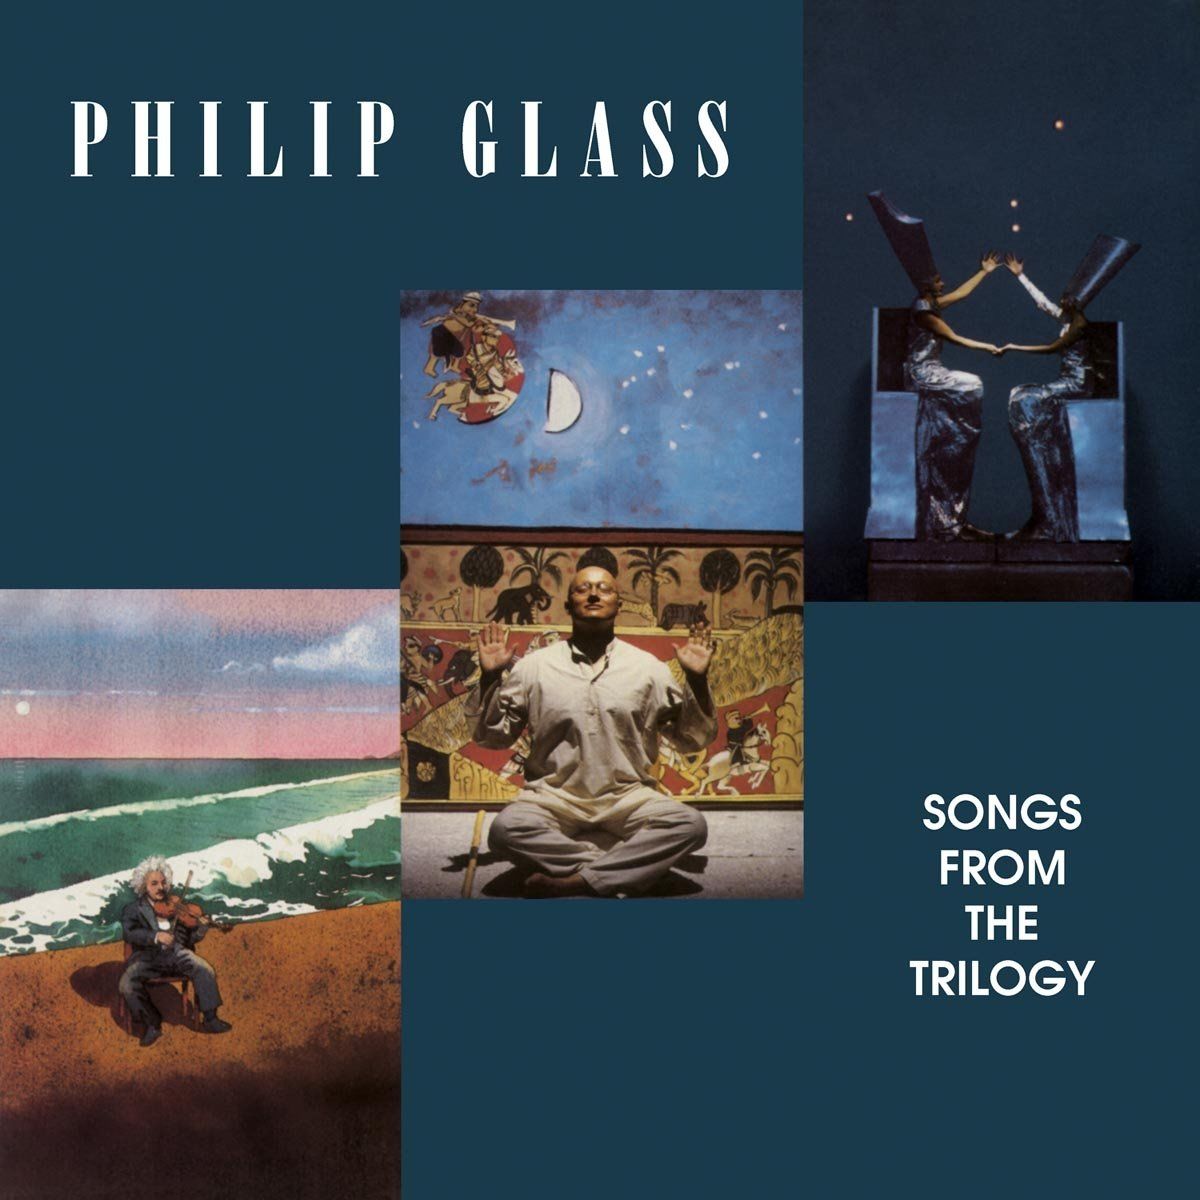 PHILIP GLASS - SONGS FROM THE TRILOGY (1986) - LP CONTEMPORARY CLASSICAL 180GR 2020 EDITION SIFIR PLAK